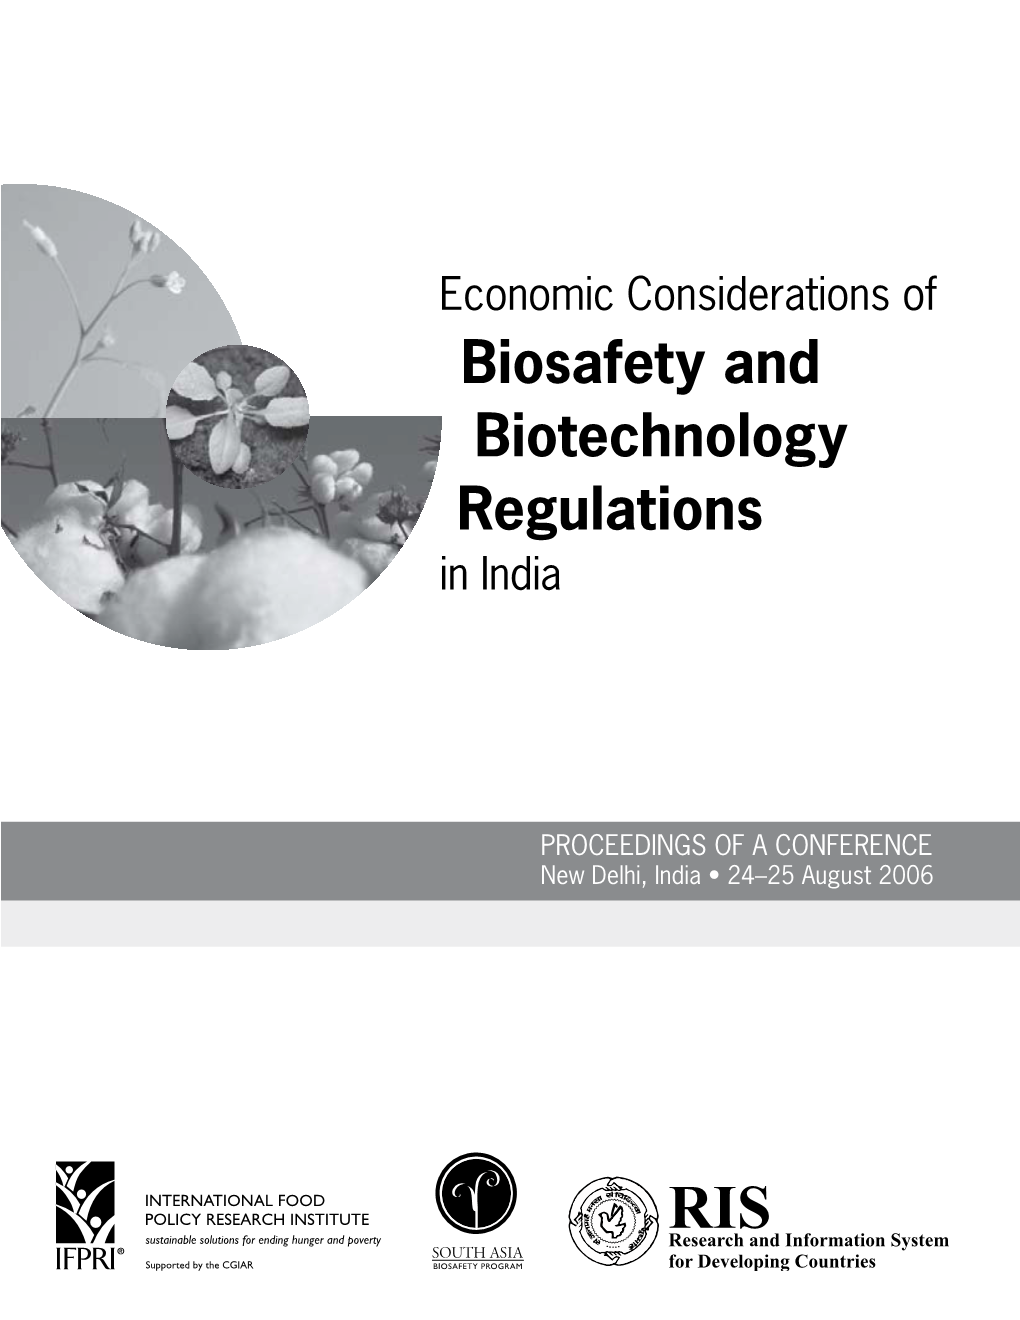 Economic Considerations of Biosafety and Biotechnology Regulations in India